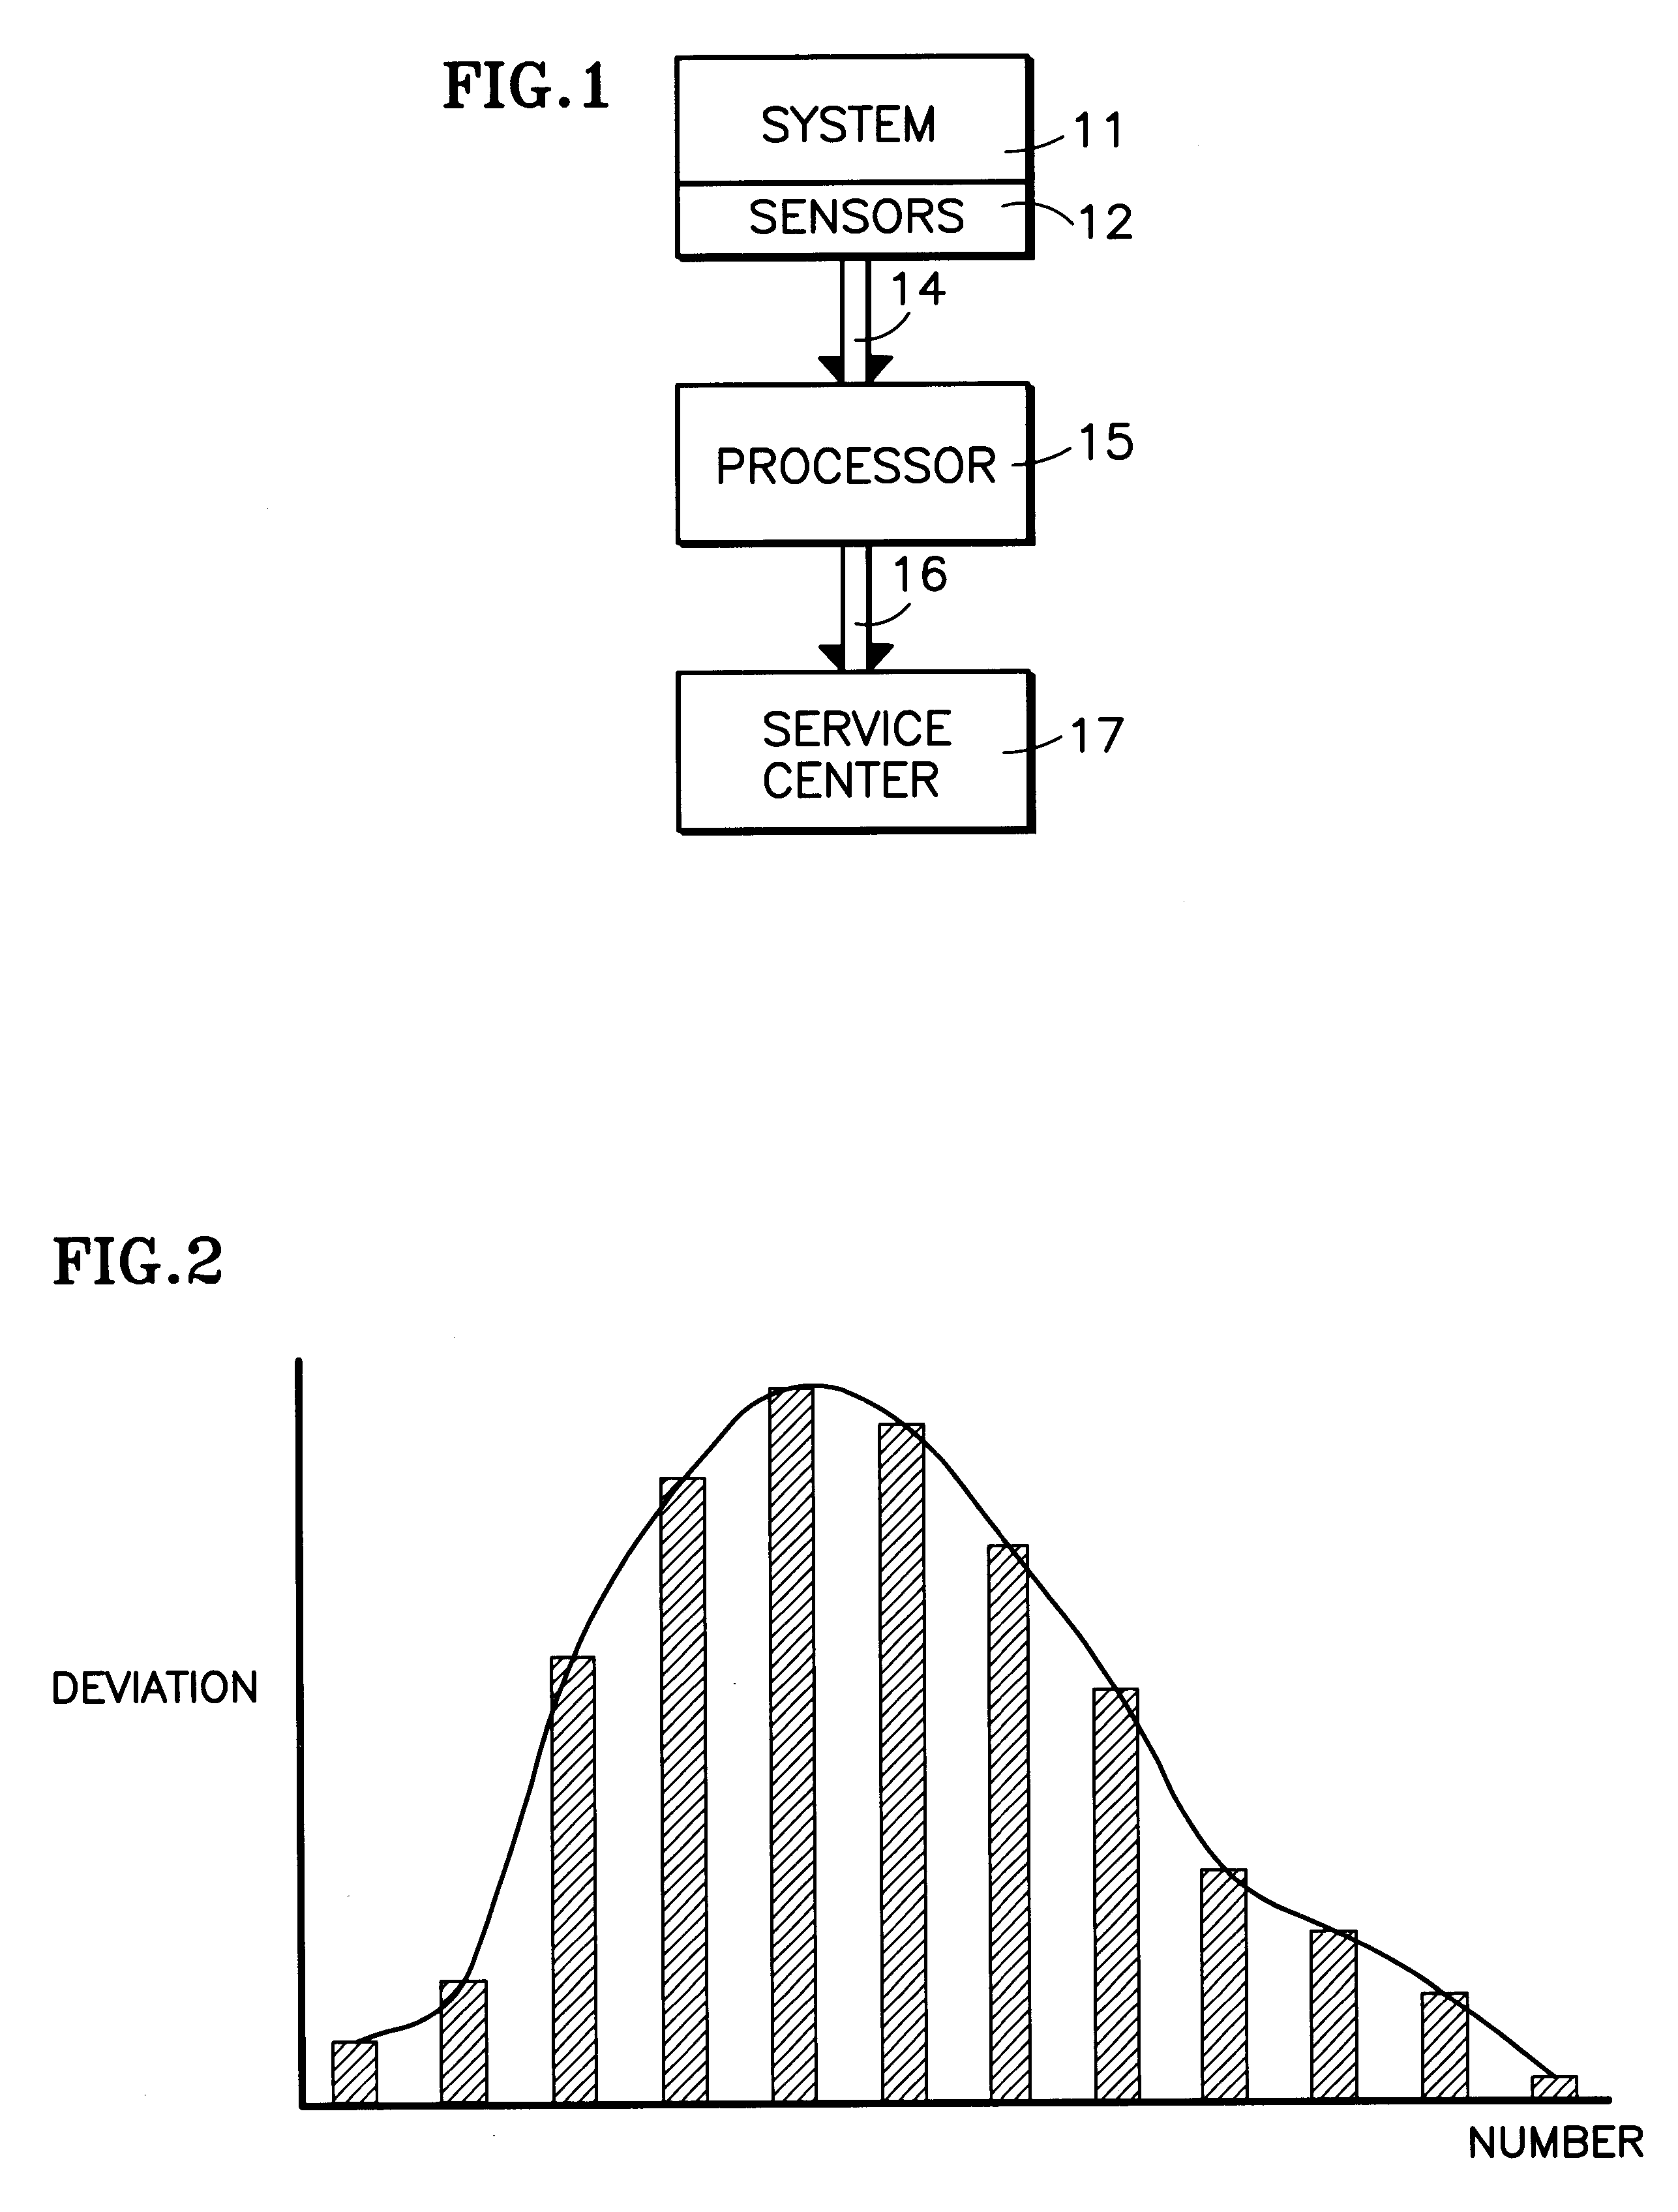 Monitoring system behavior using empirical distributions and cumulative distribution norms